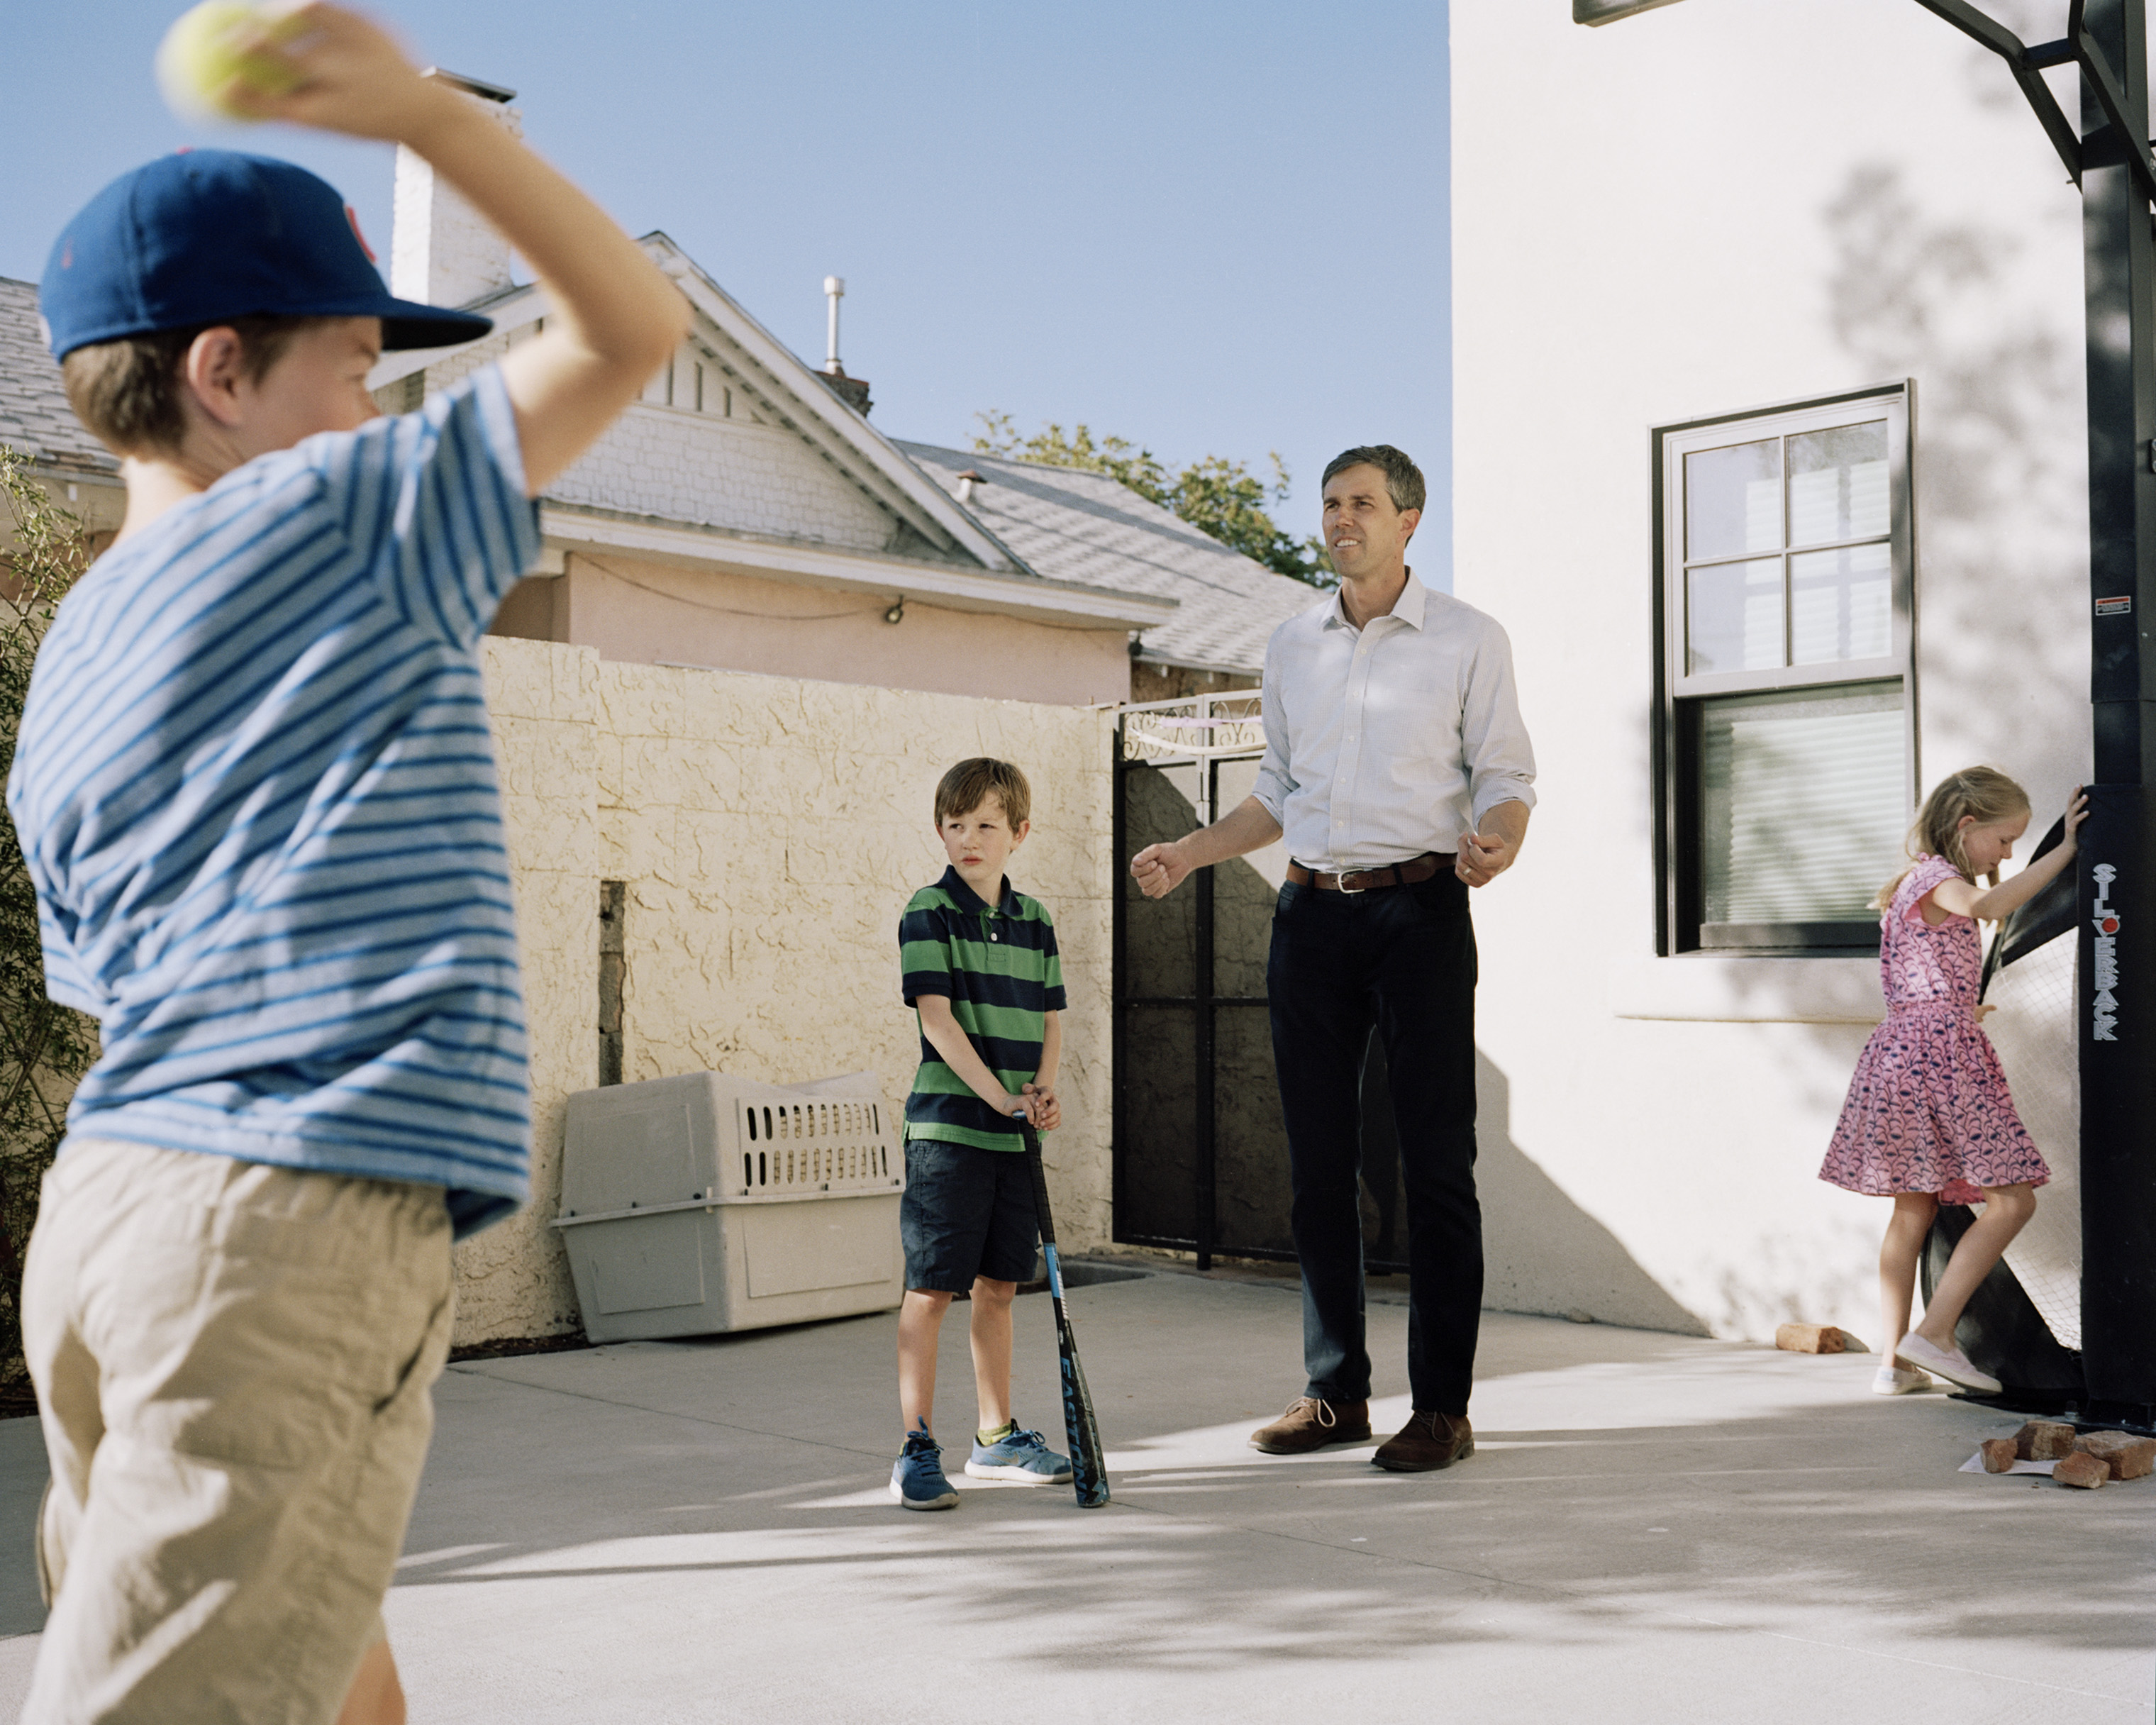 O'Rourke plays with his kids outside of his home. (Benjamin Rasmussen for TIME)